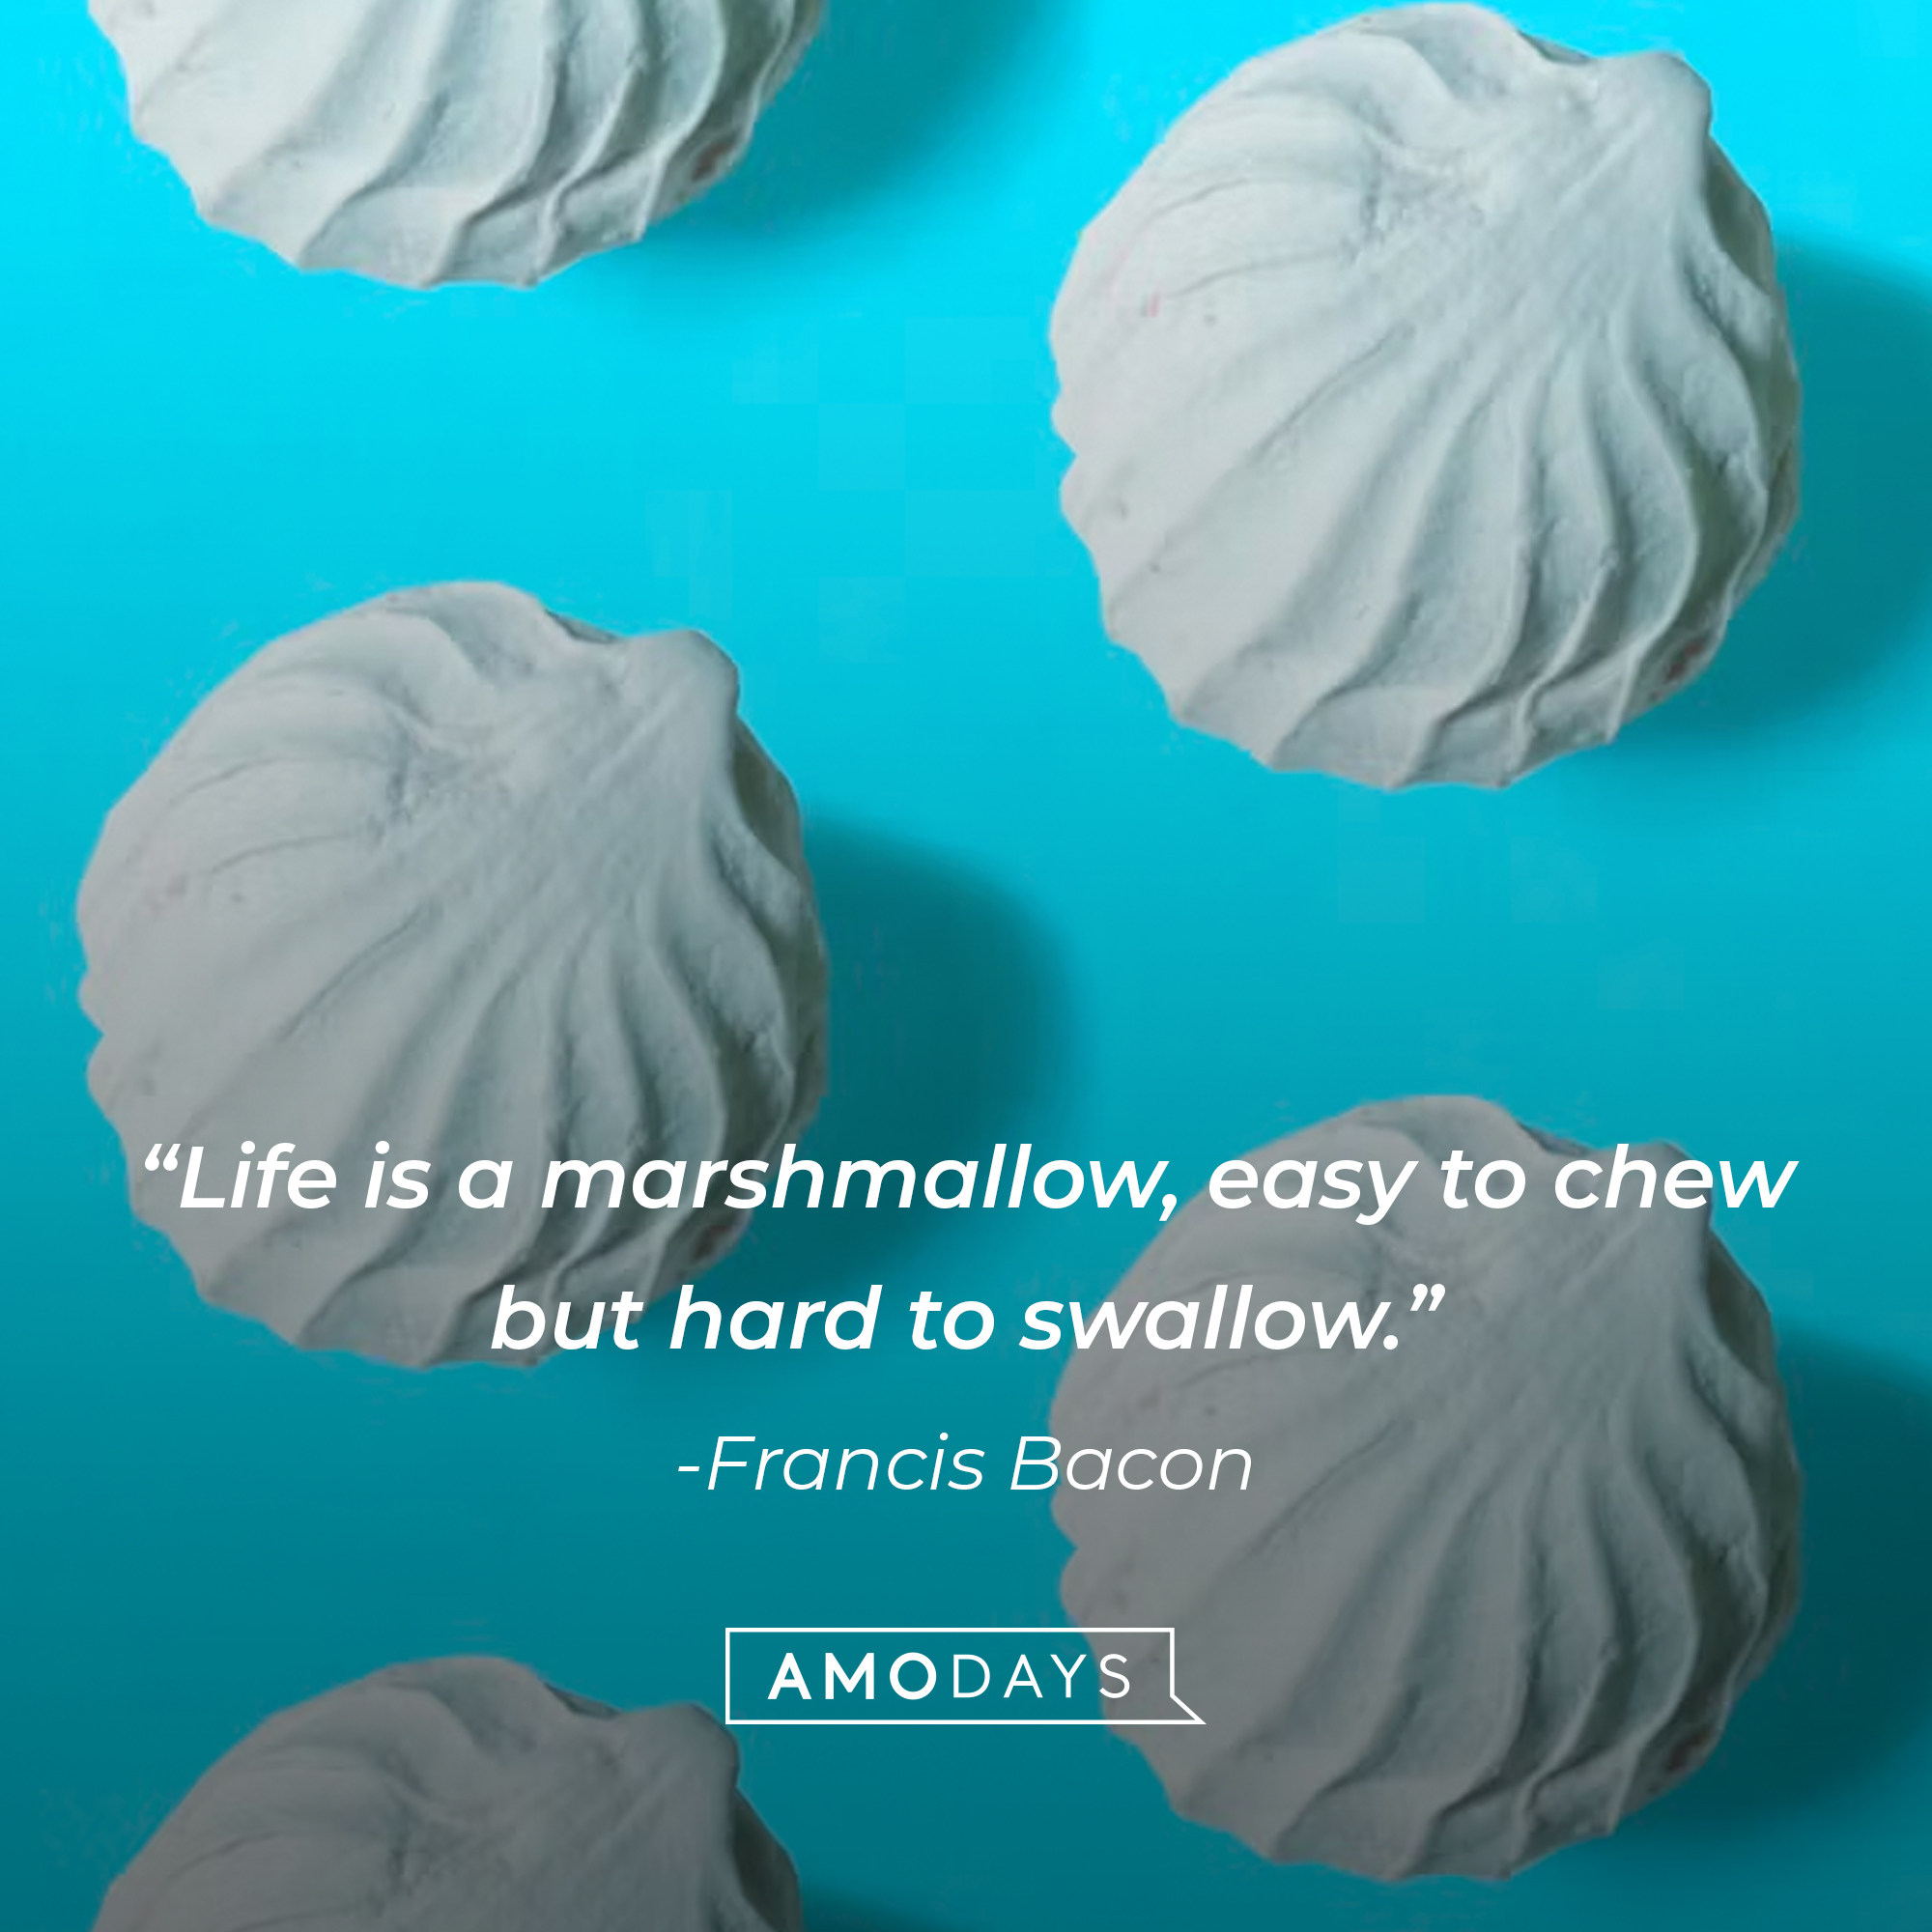 Francis Bacon's quote: "Life is a marshmallow, easy to chew but hard to swallow." Source: Quotestats